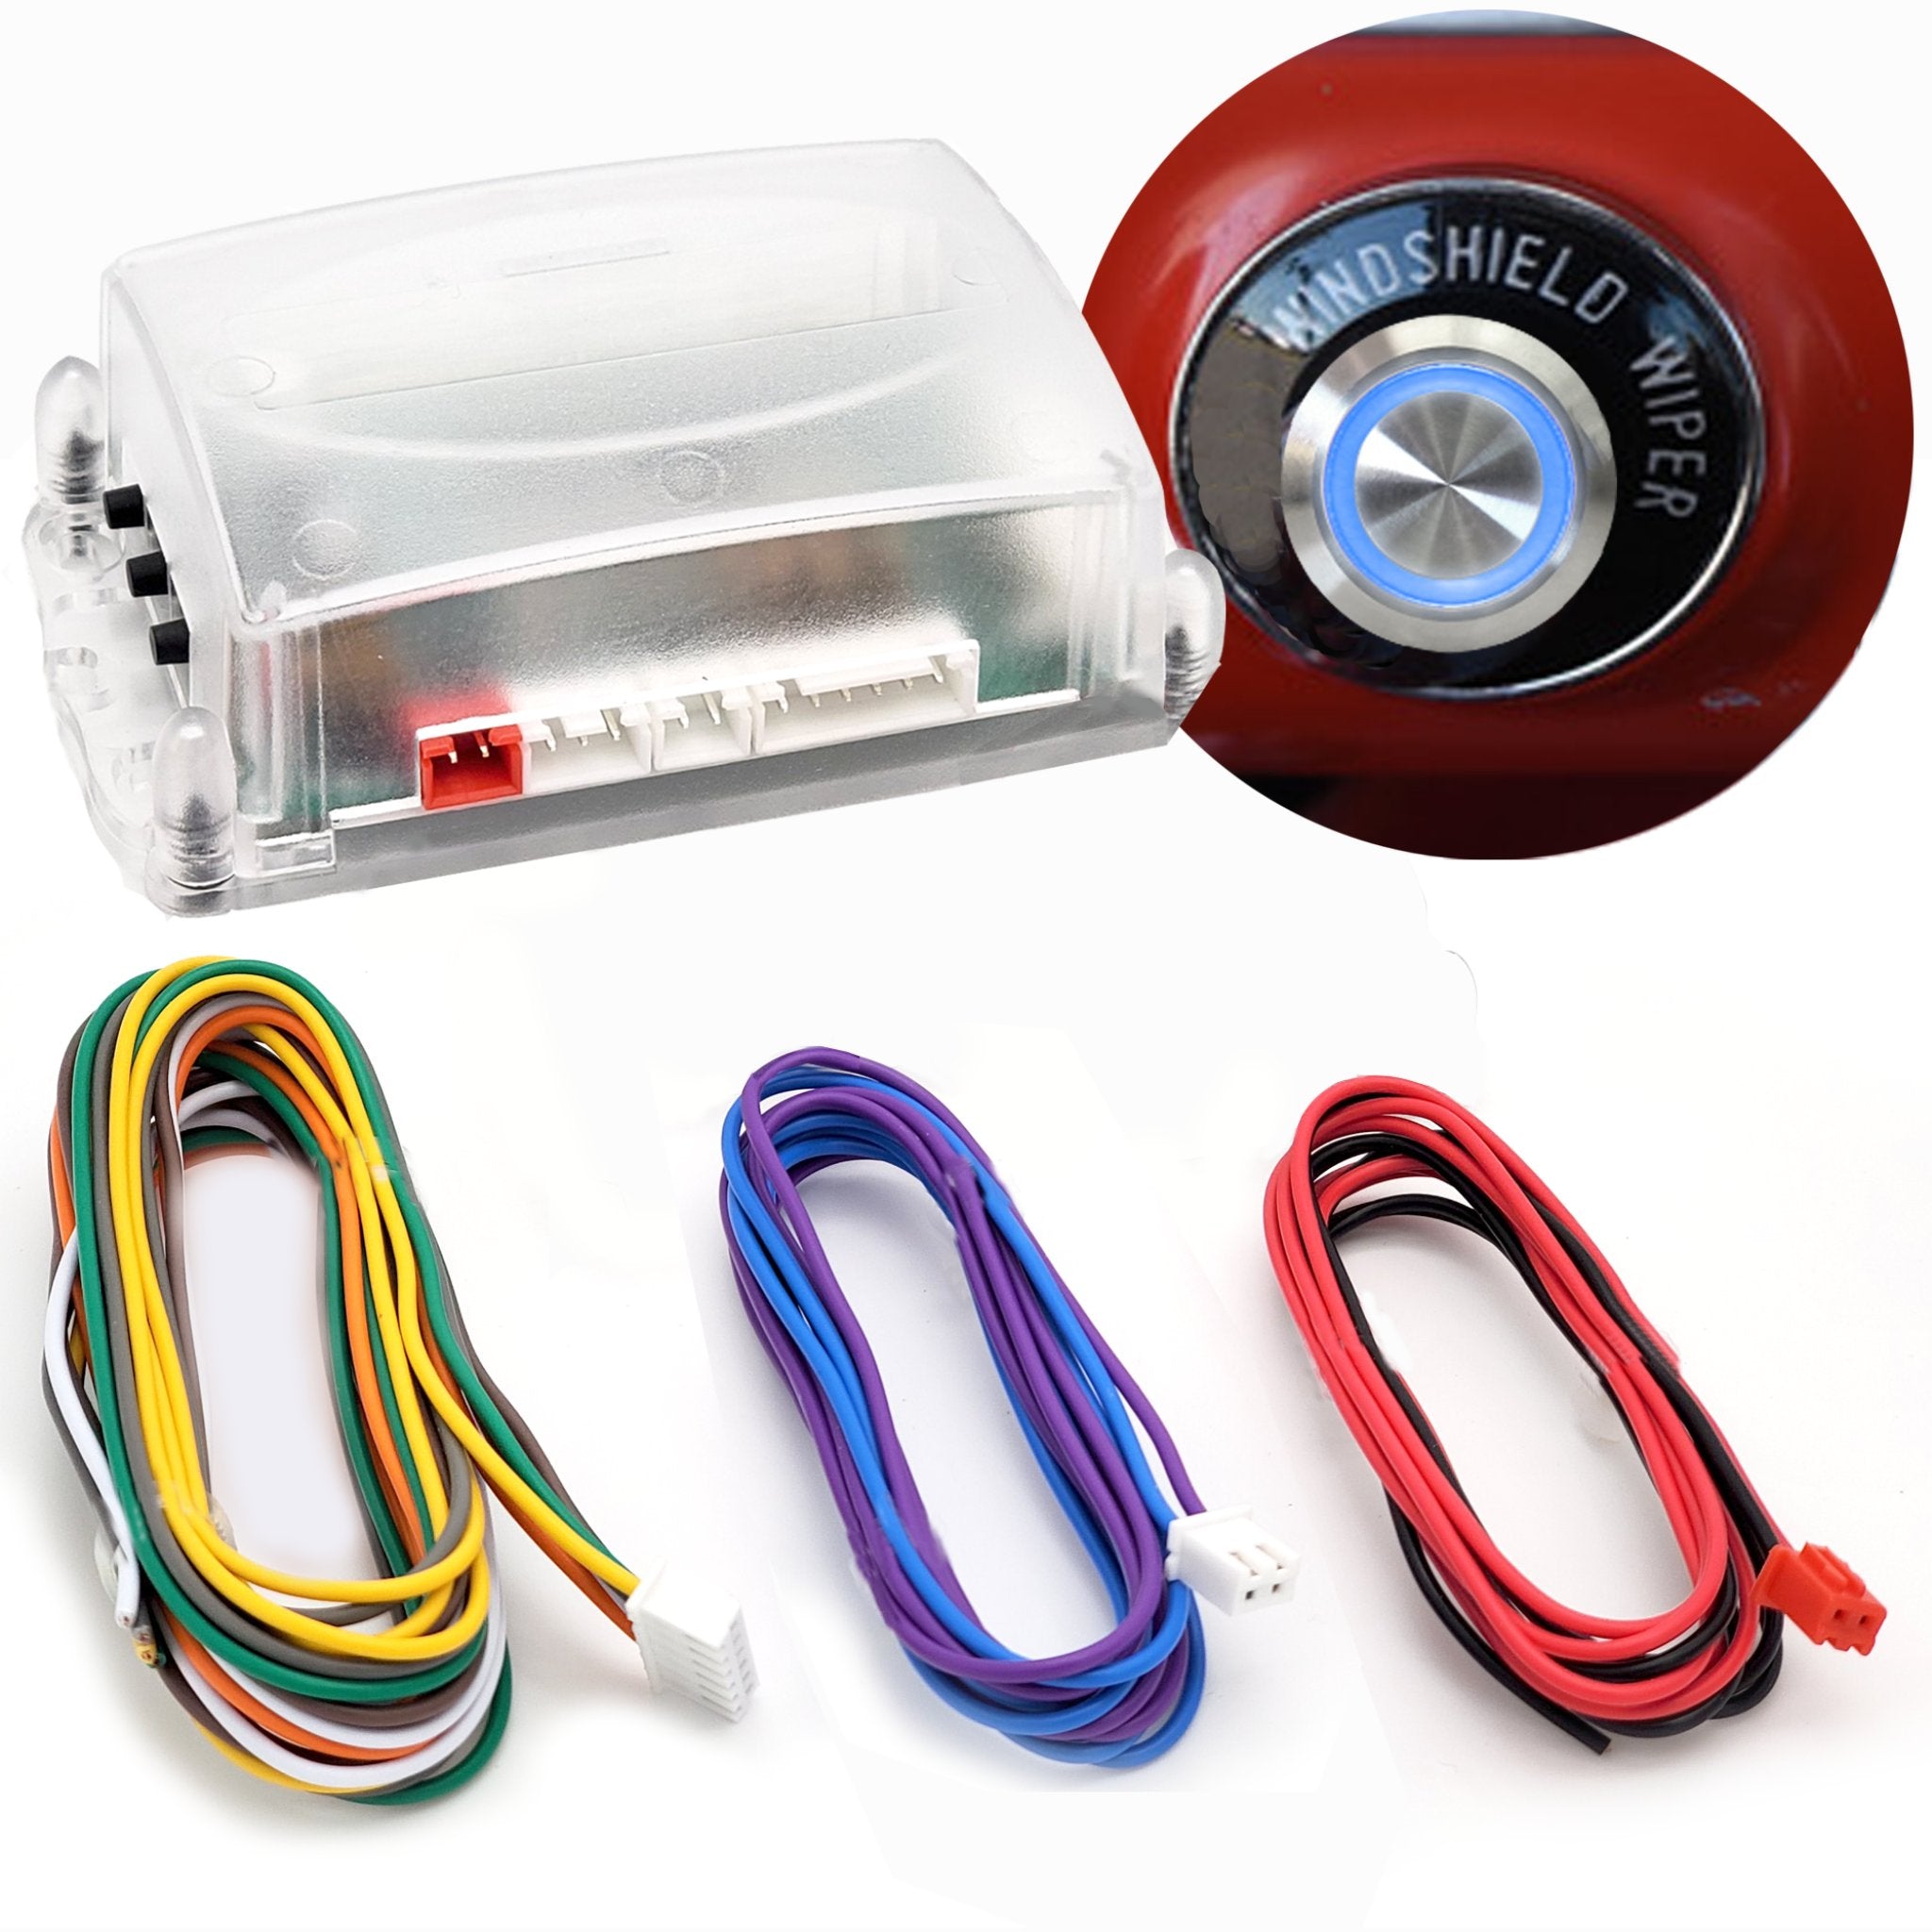 Power Windshield Wiper On/Off Low/High Control Module Push Button Kit 3 Position